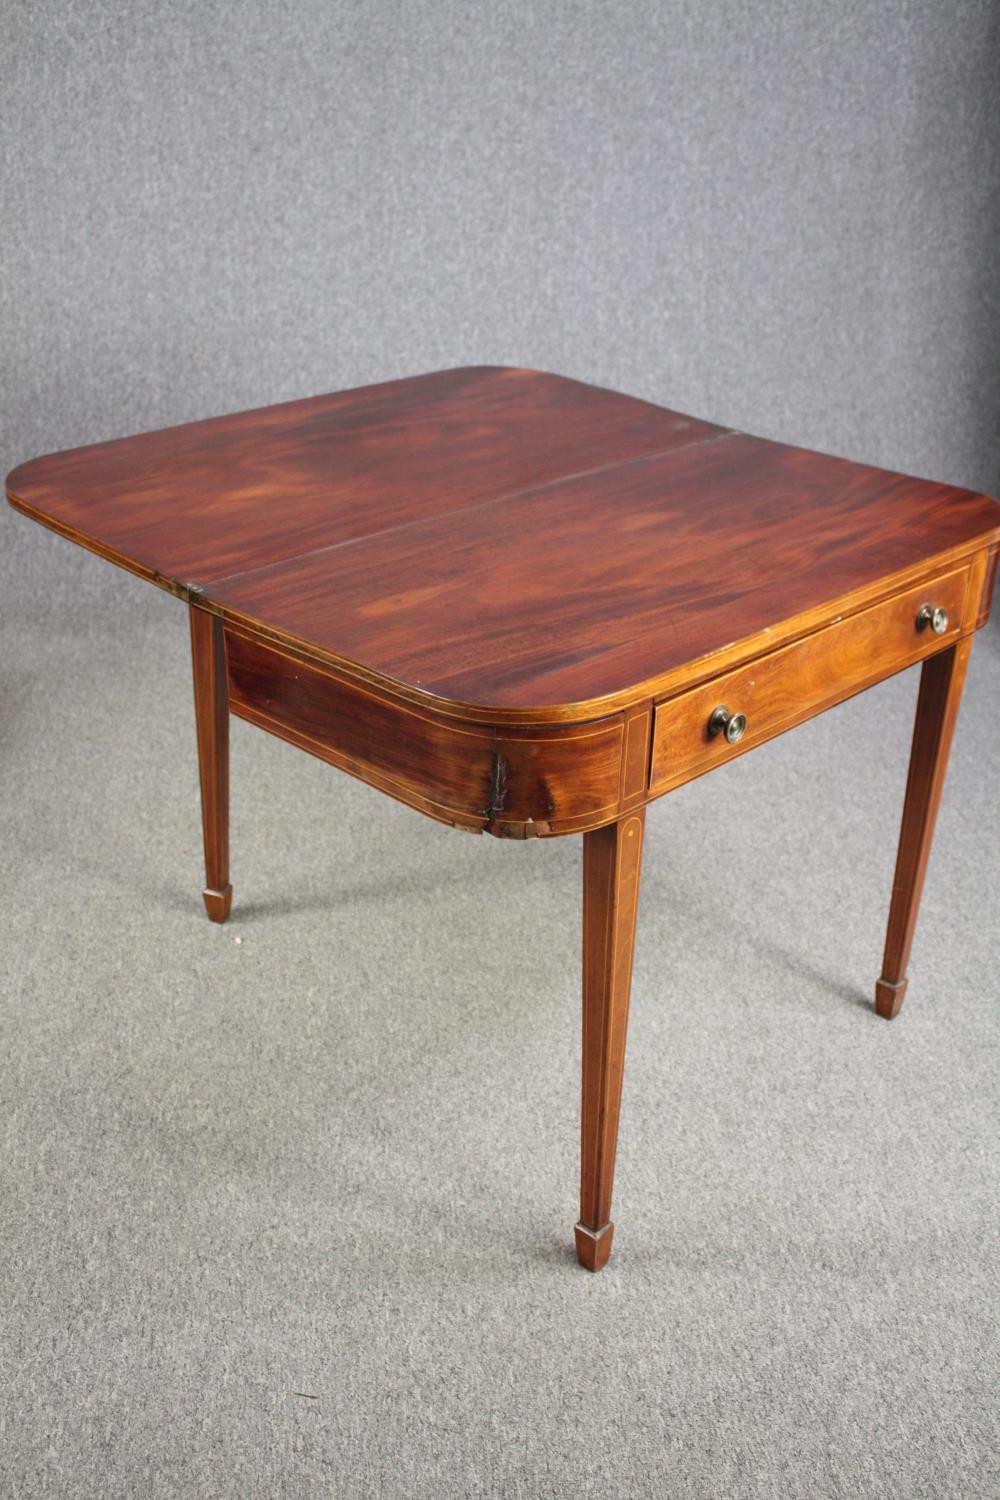 Tea table, Georgian mahogany with satinwood inlay. H.73 W.96 D.102. (ext) - Image 7 of 7